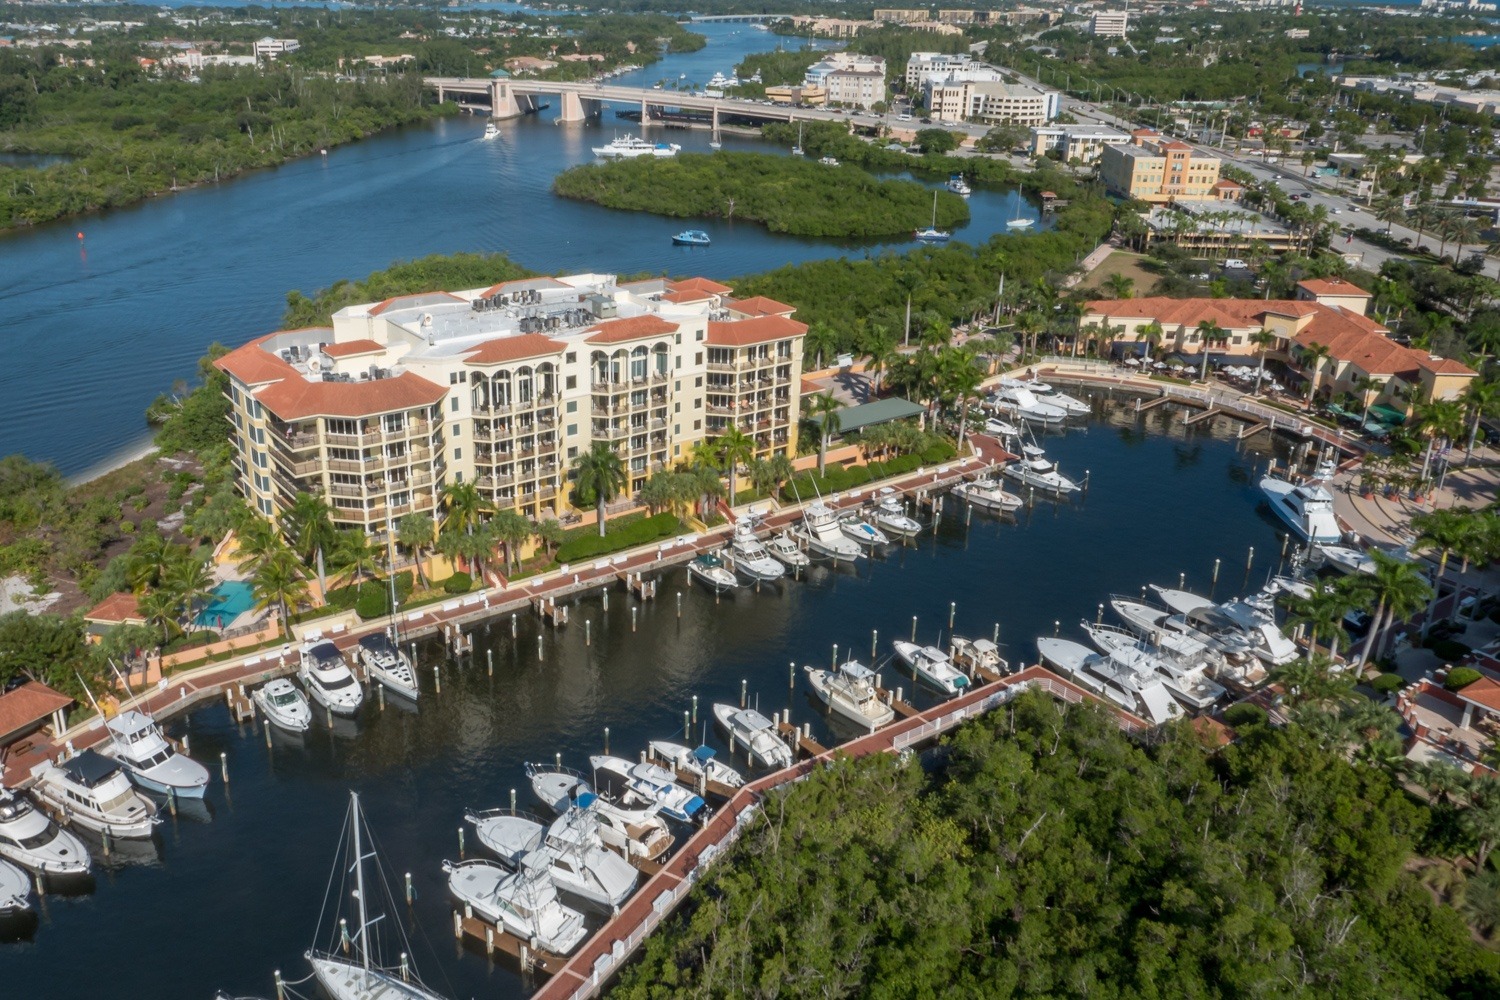 The Pointe at Jupiter Yacht Club